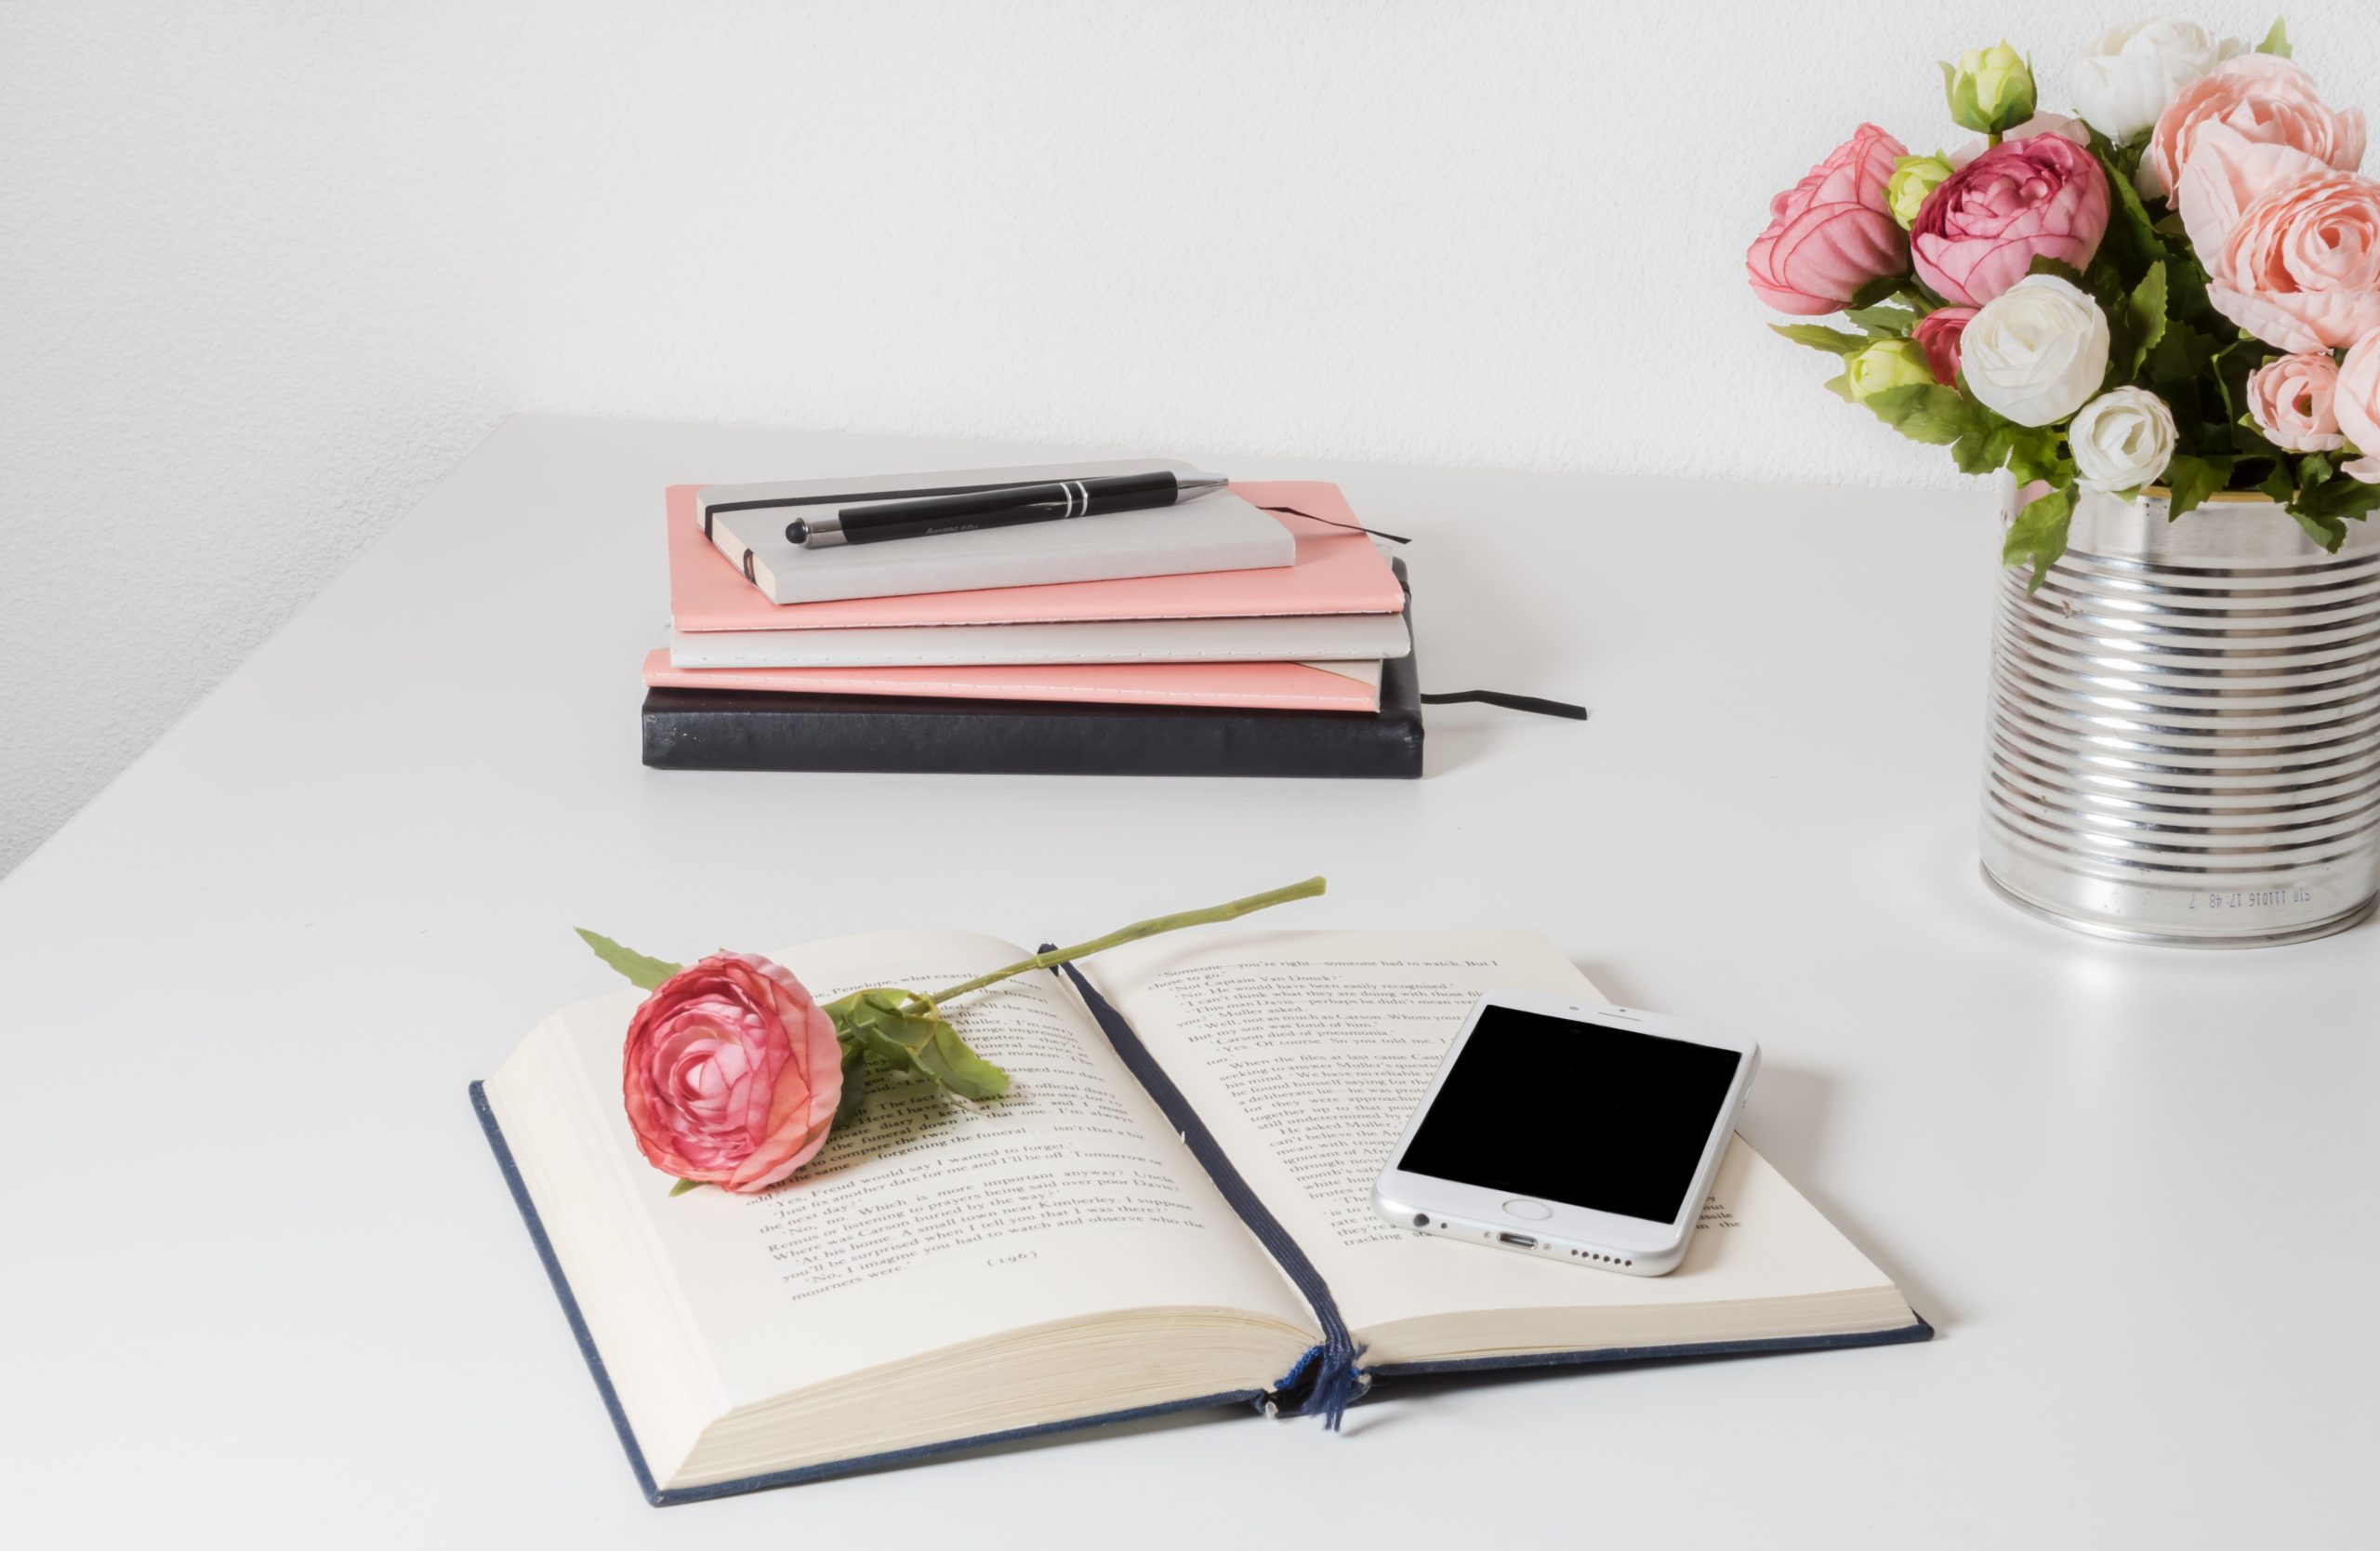 A book, a rose, a smartphone, a pile of diaries, a pen and a tin of flowers sit on a white table.